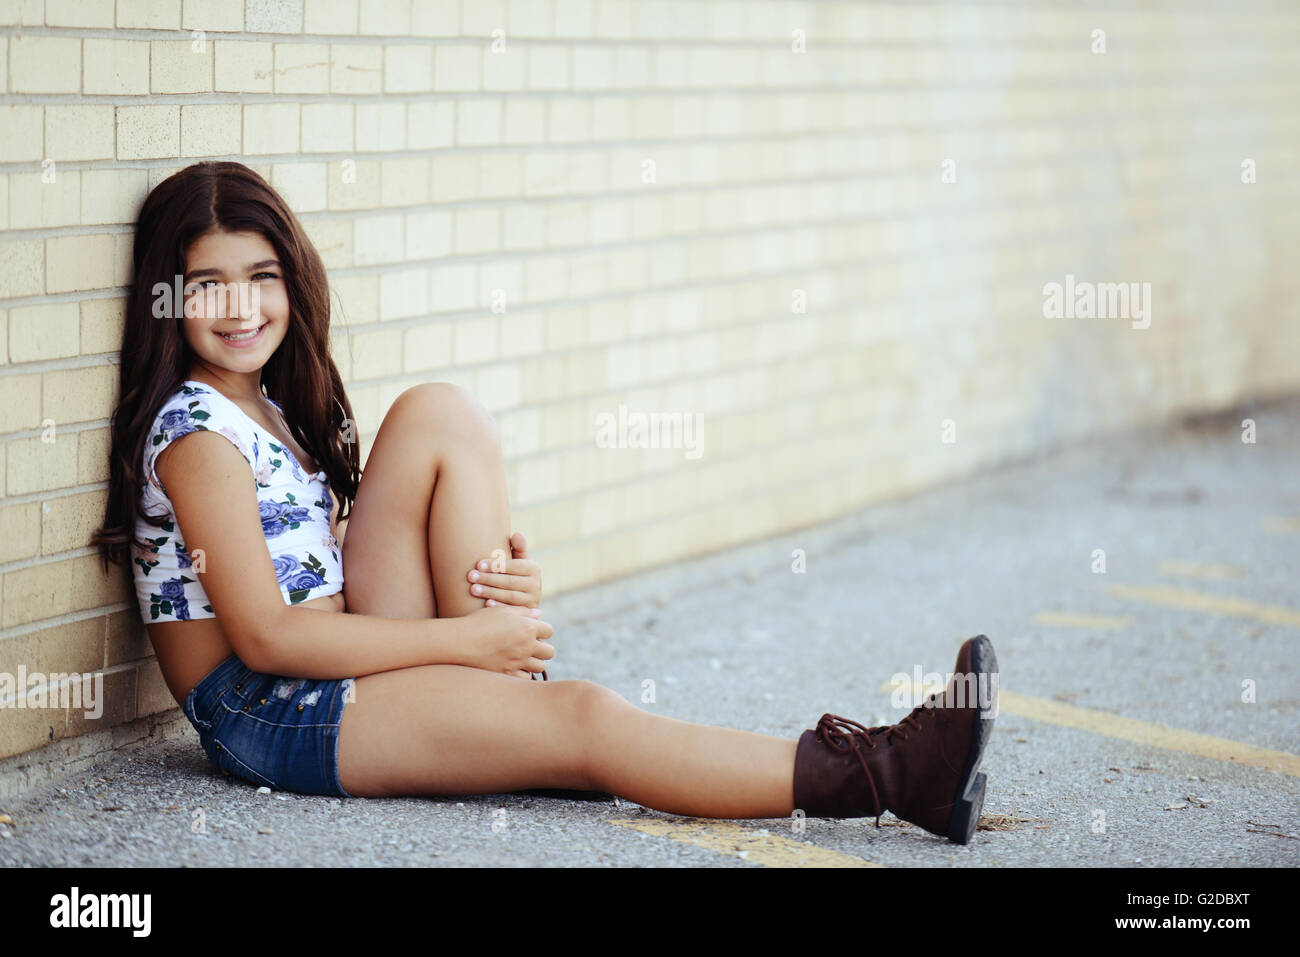 young girl leaning on brick wall Stock Photo